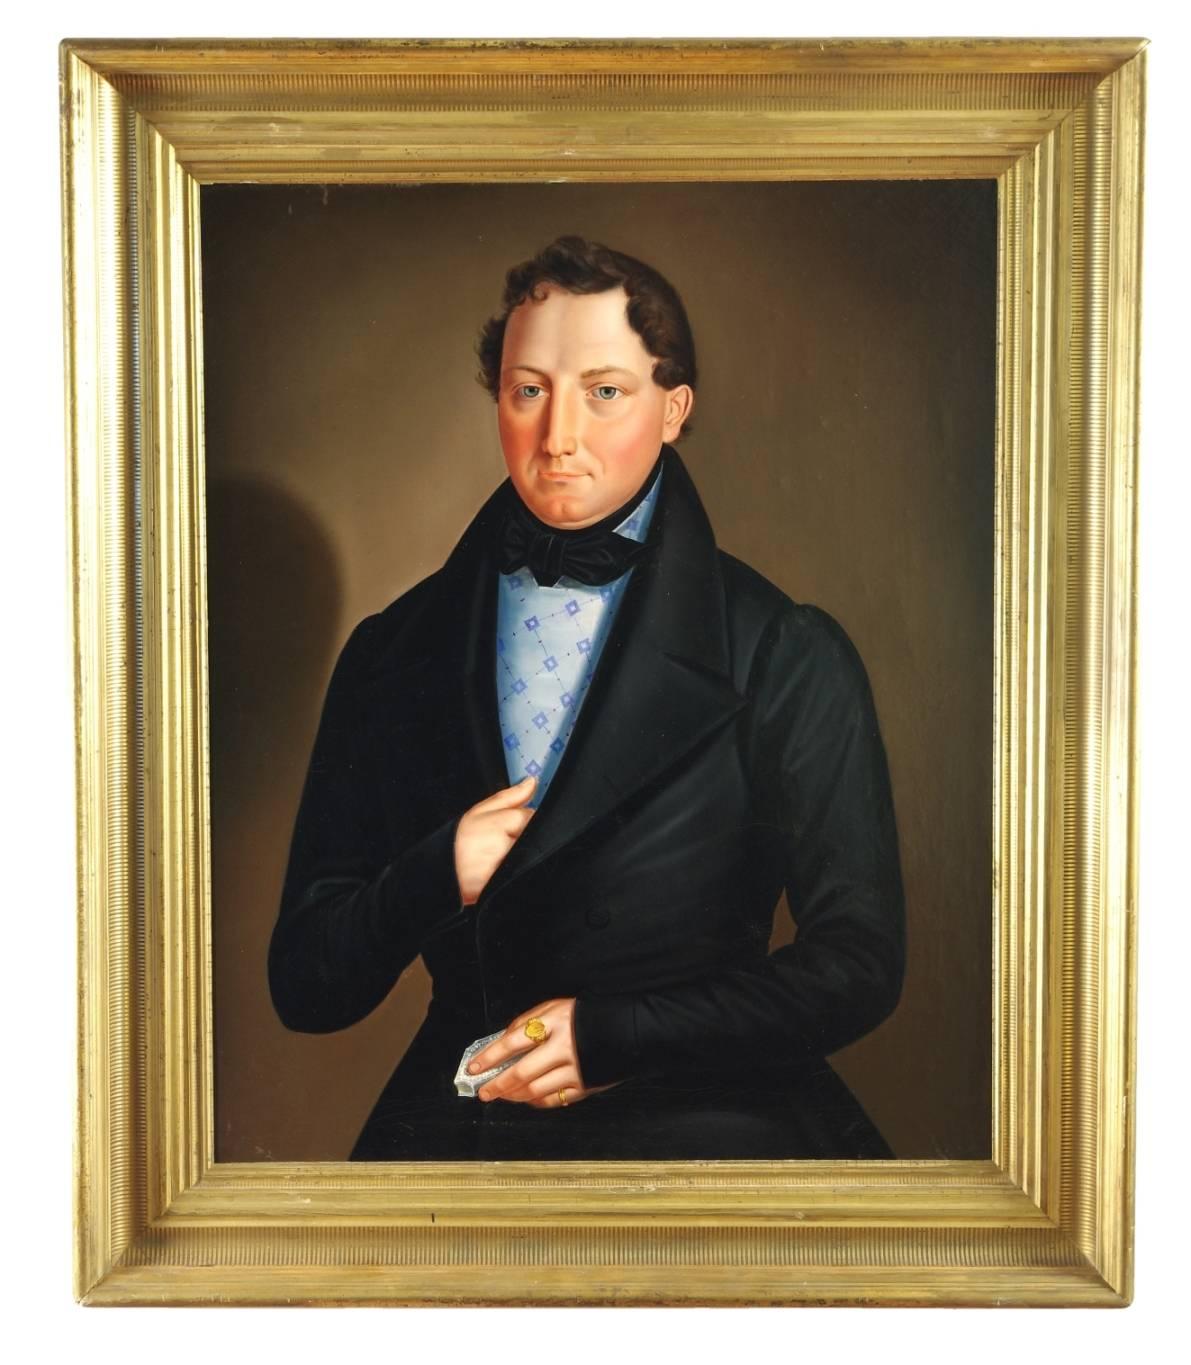 Biedermeier portrait of a gentleman, the young man with liquid blue eyes dressed in formal attire, wearing a gold monogrammed ring and holding a silver snuff box. Oil on canvas, laid down on foam-core, in a 19th century giltwood frame.
Measures: